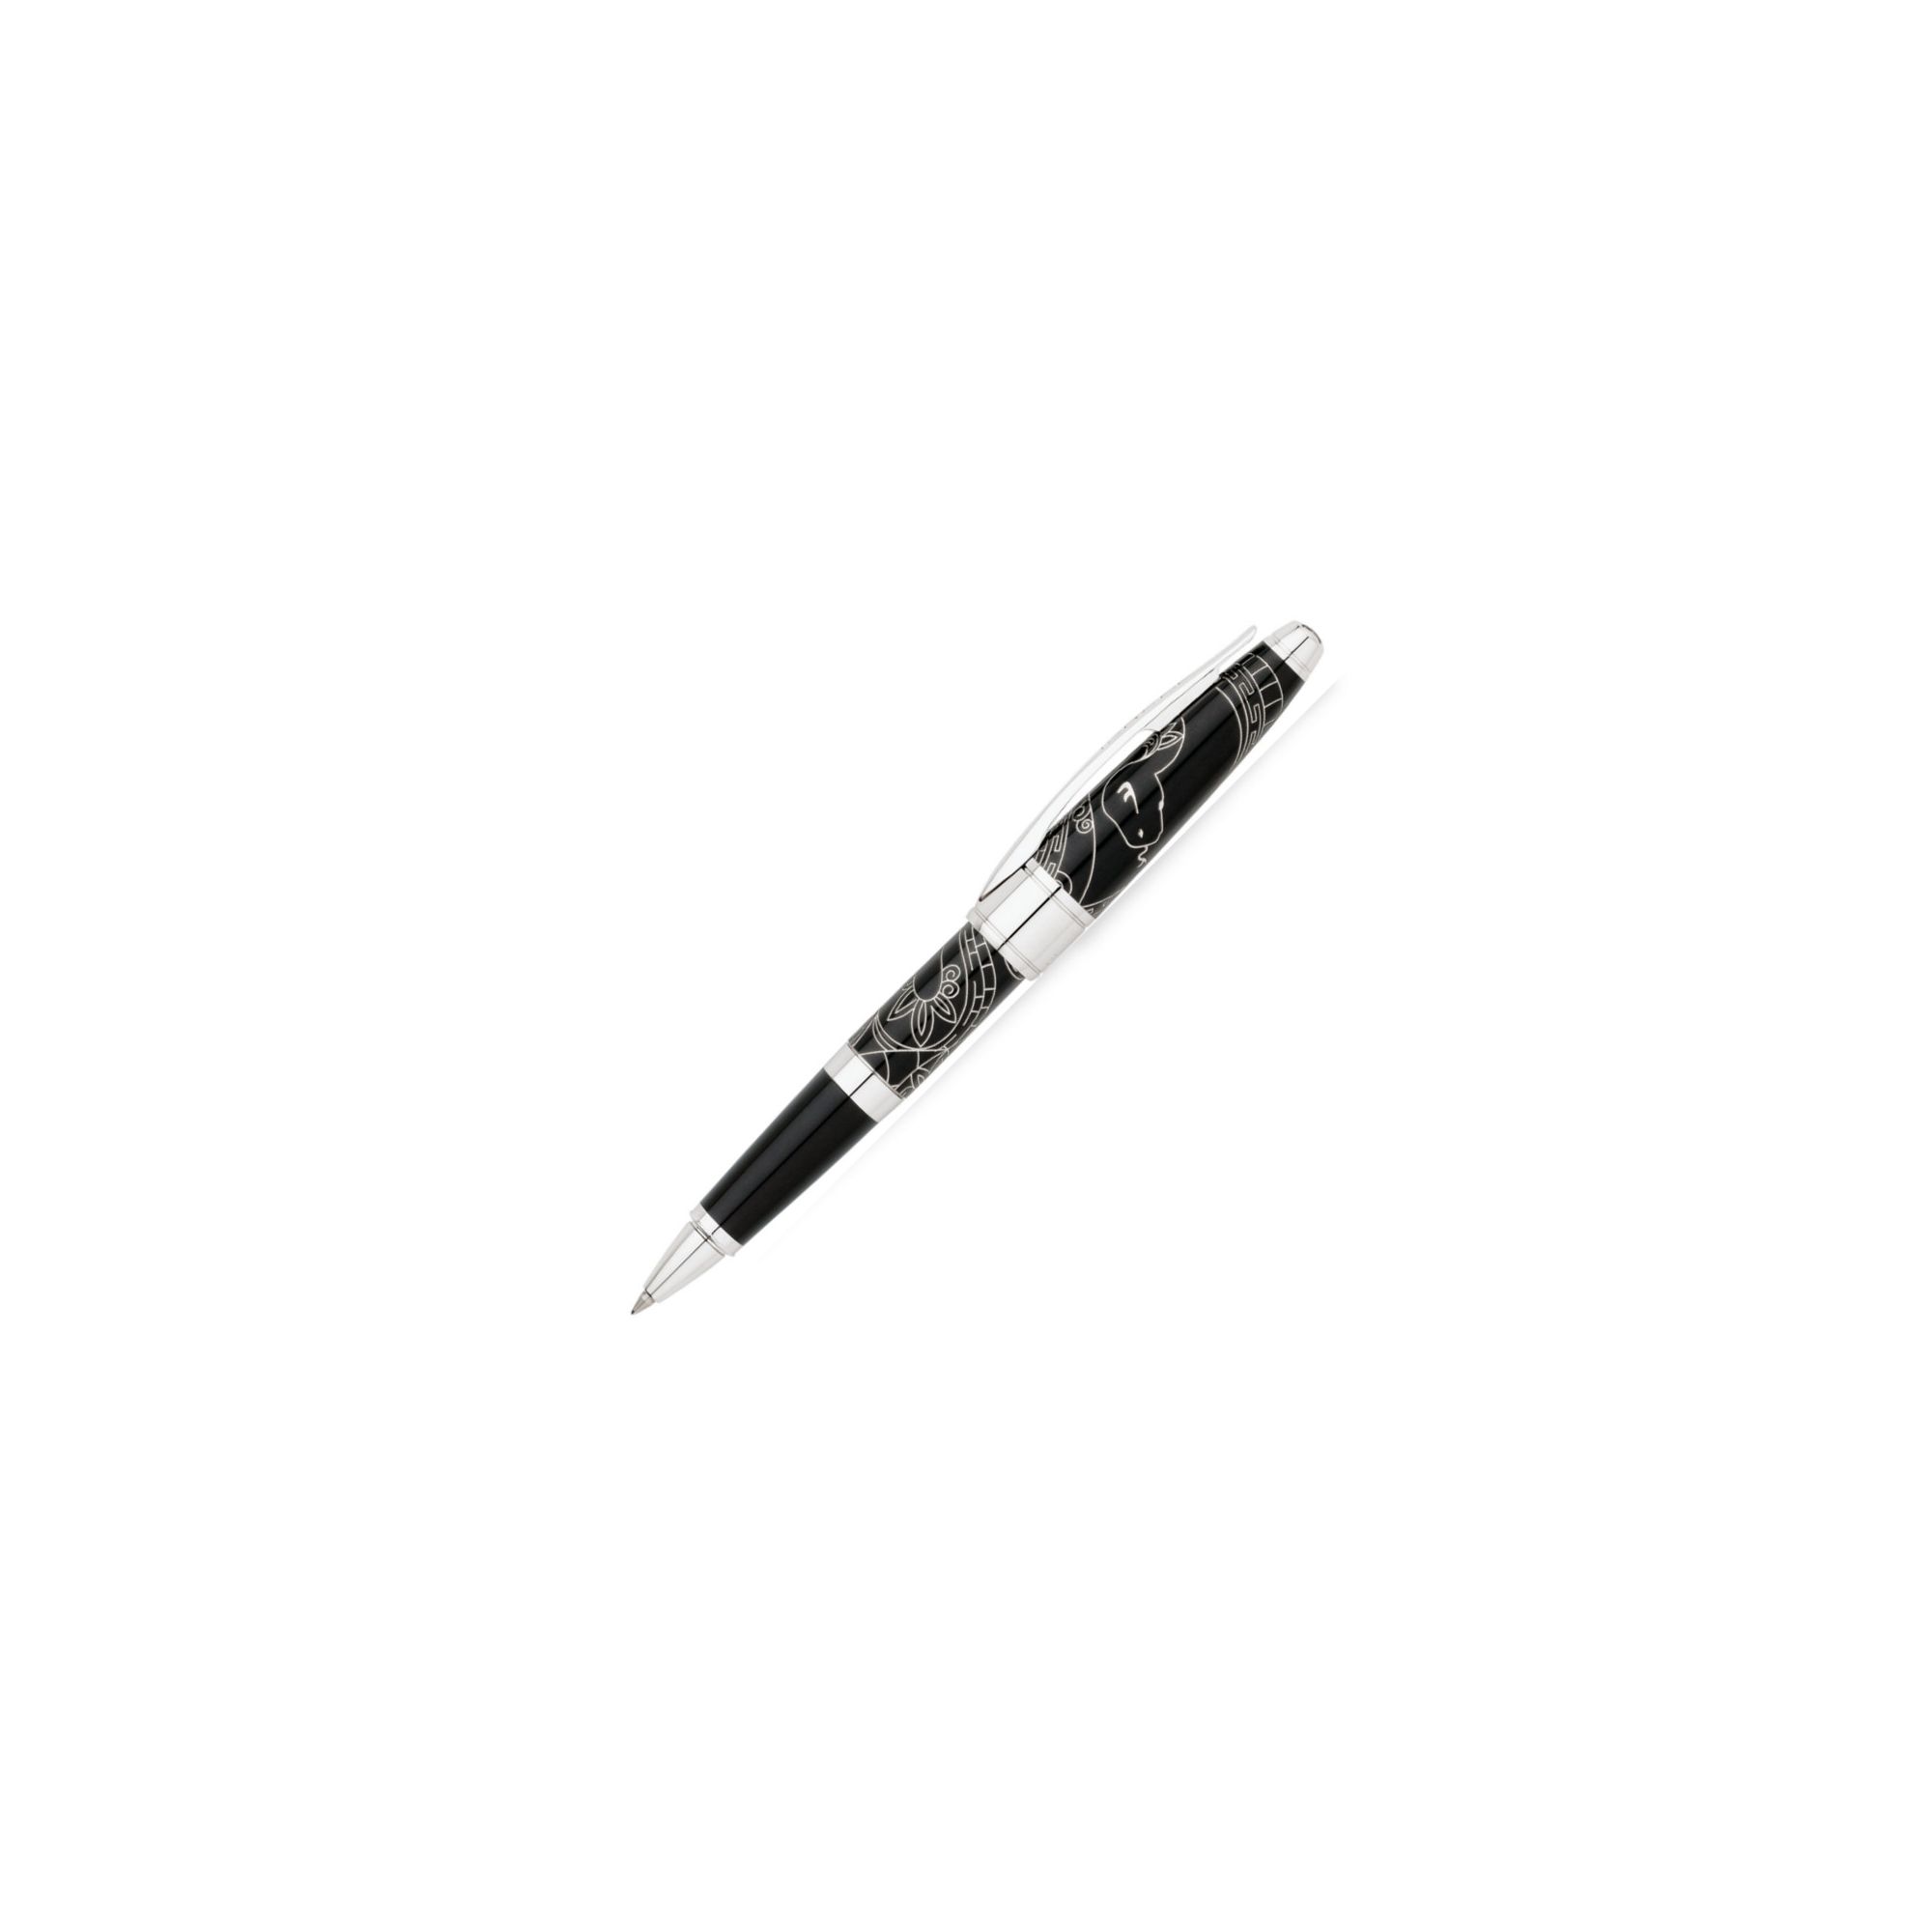 Cross Year of the Snake Black Lacquer - Rollerball Pen at Tesco Direct